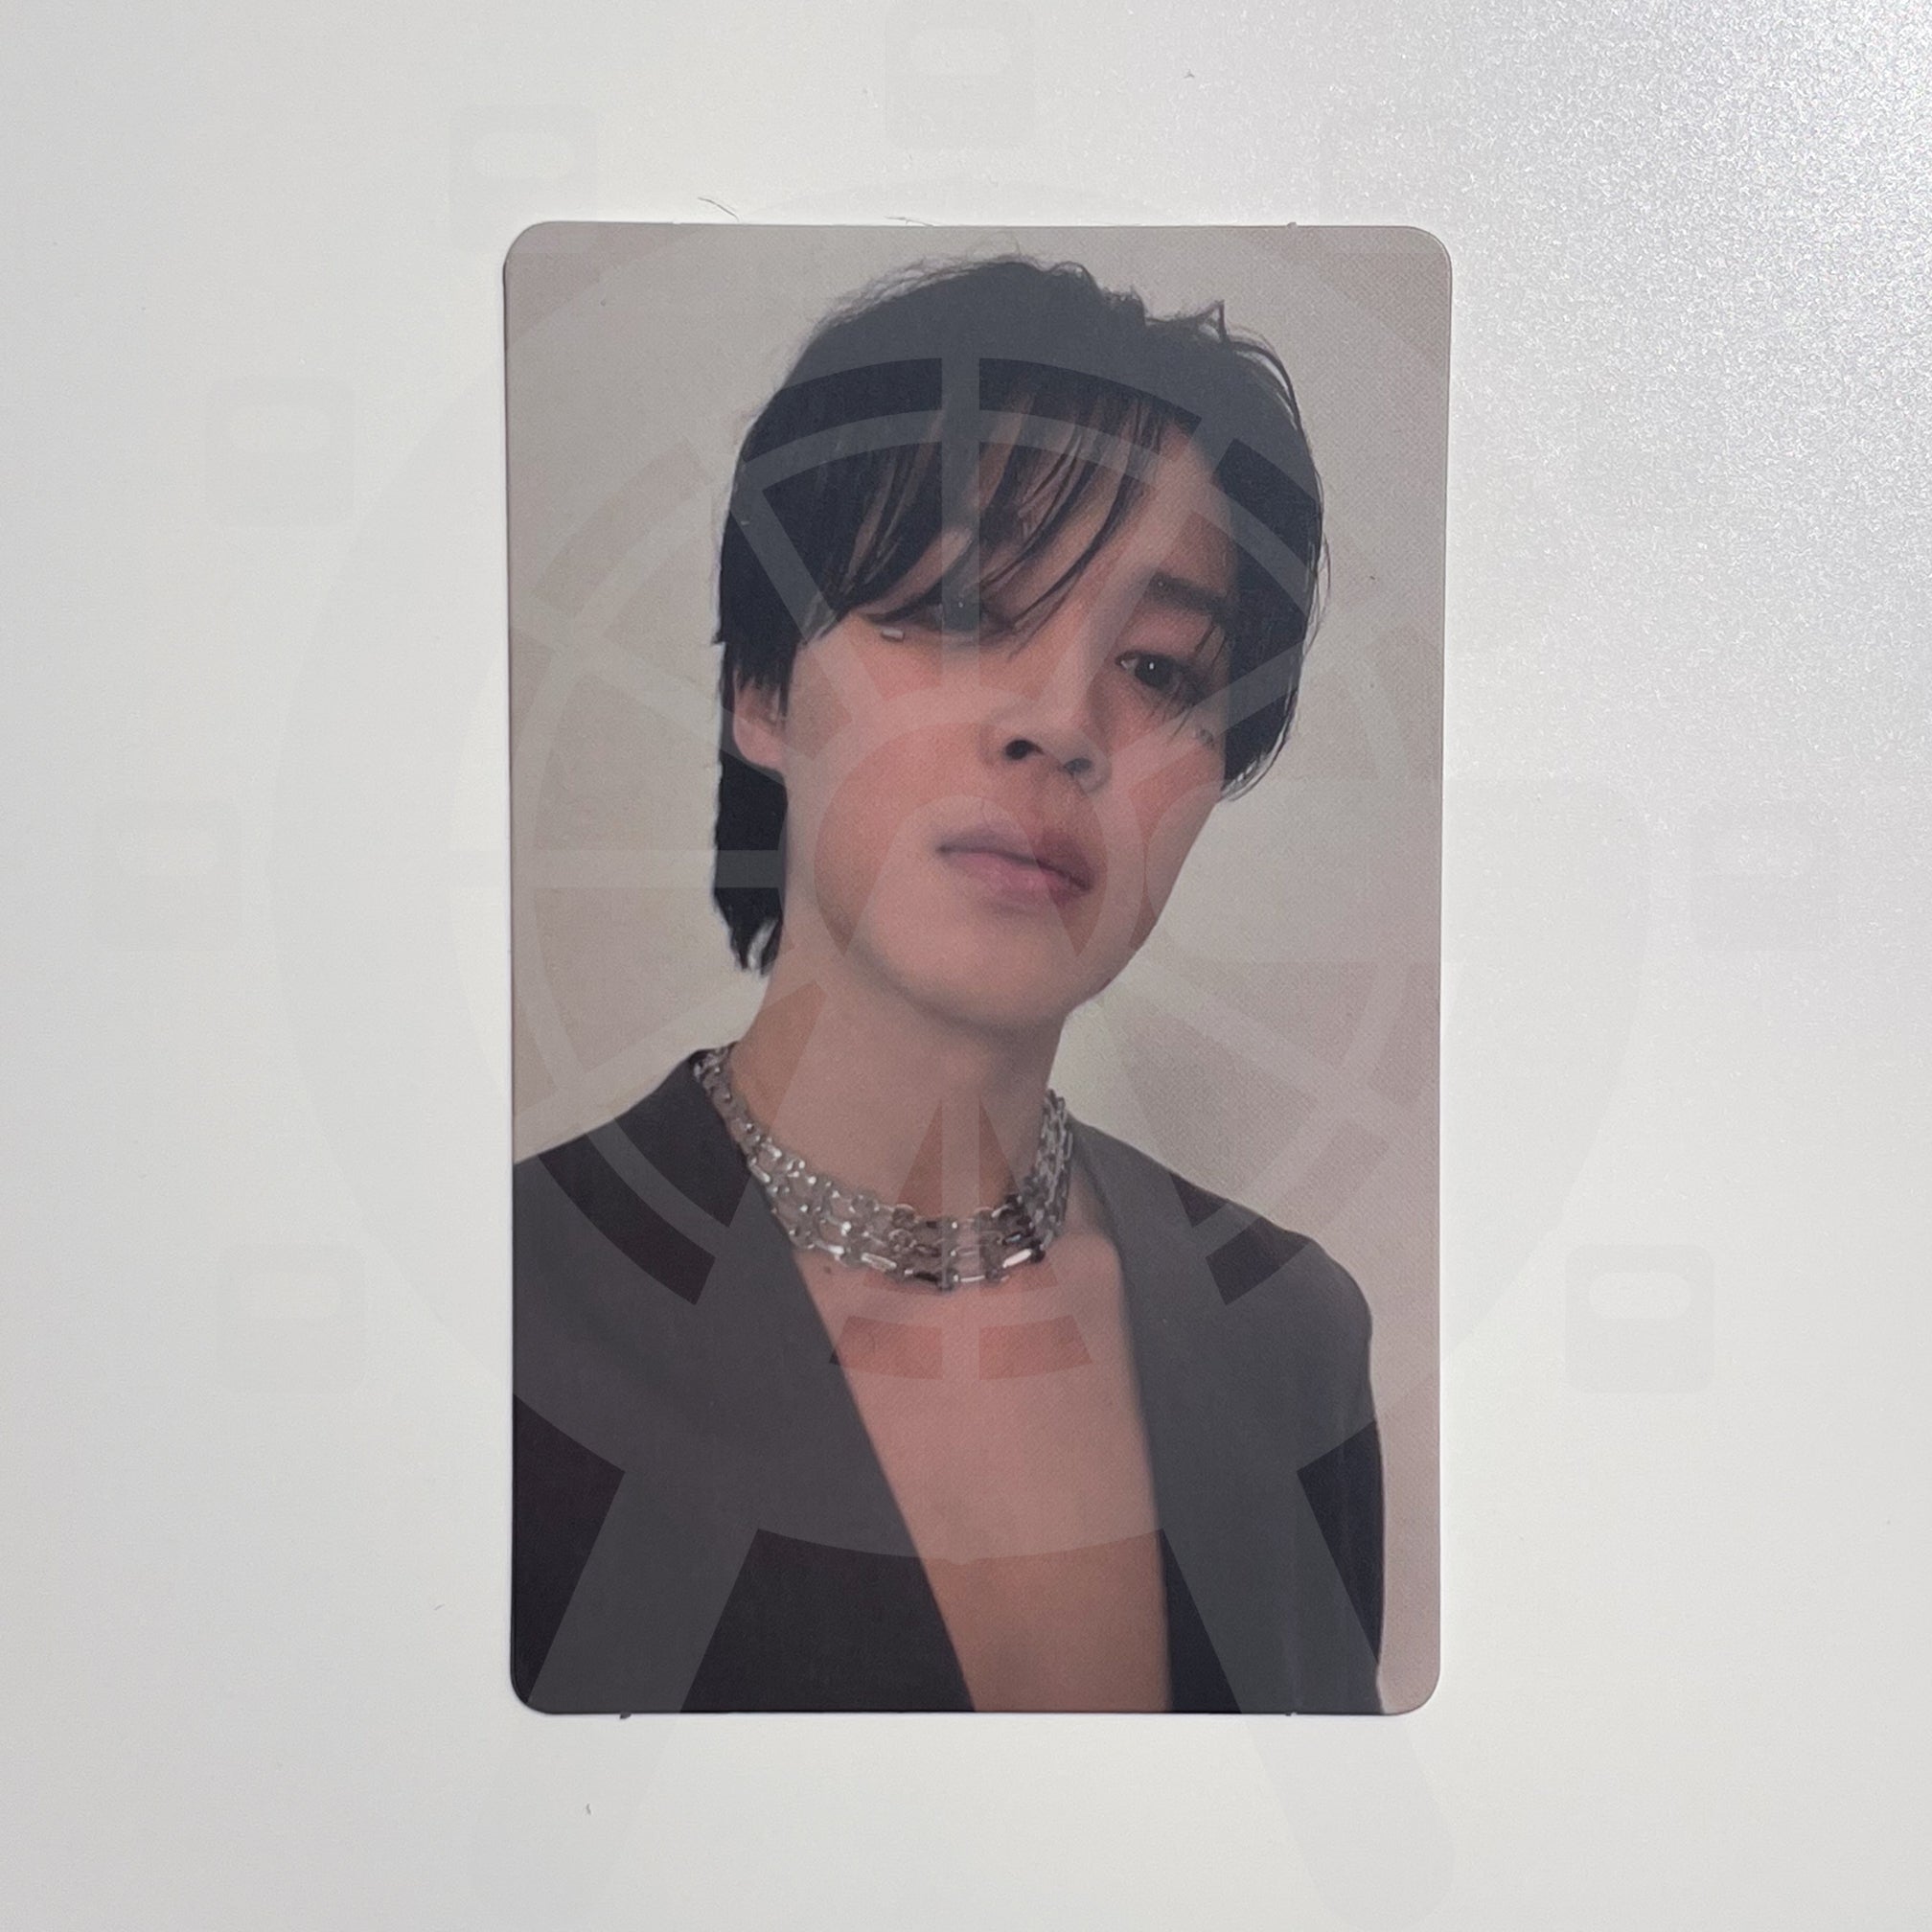 (TRADE) BTS 'Face' (Jimin; Undefinable Face 2)